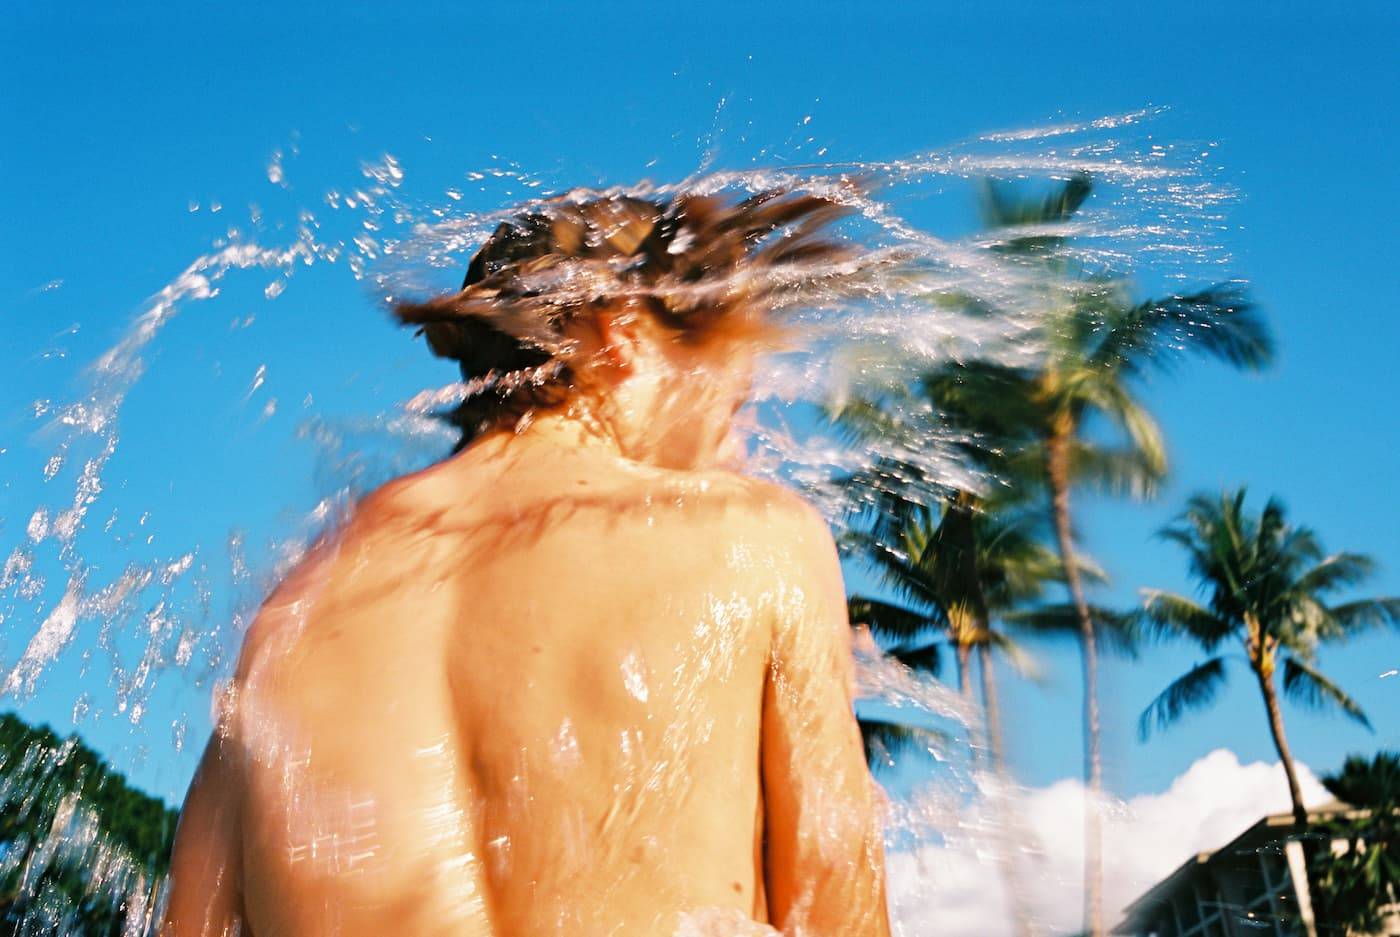 Boy in Surf shaking his wet hair and splashing water, vivid colors, plam trees and blue sky in background